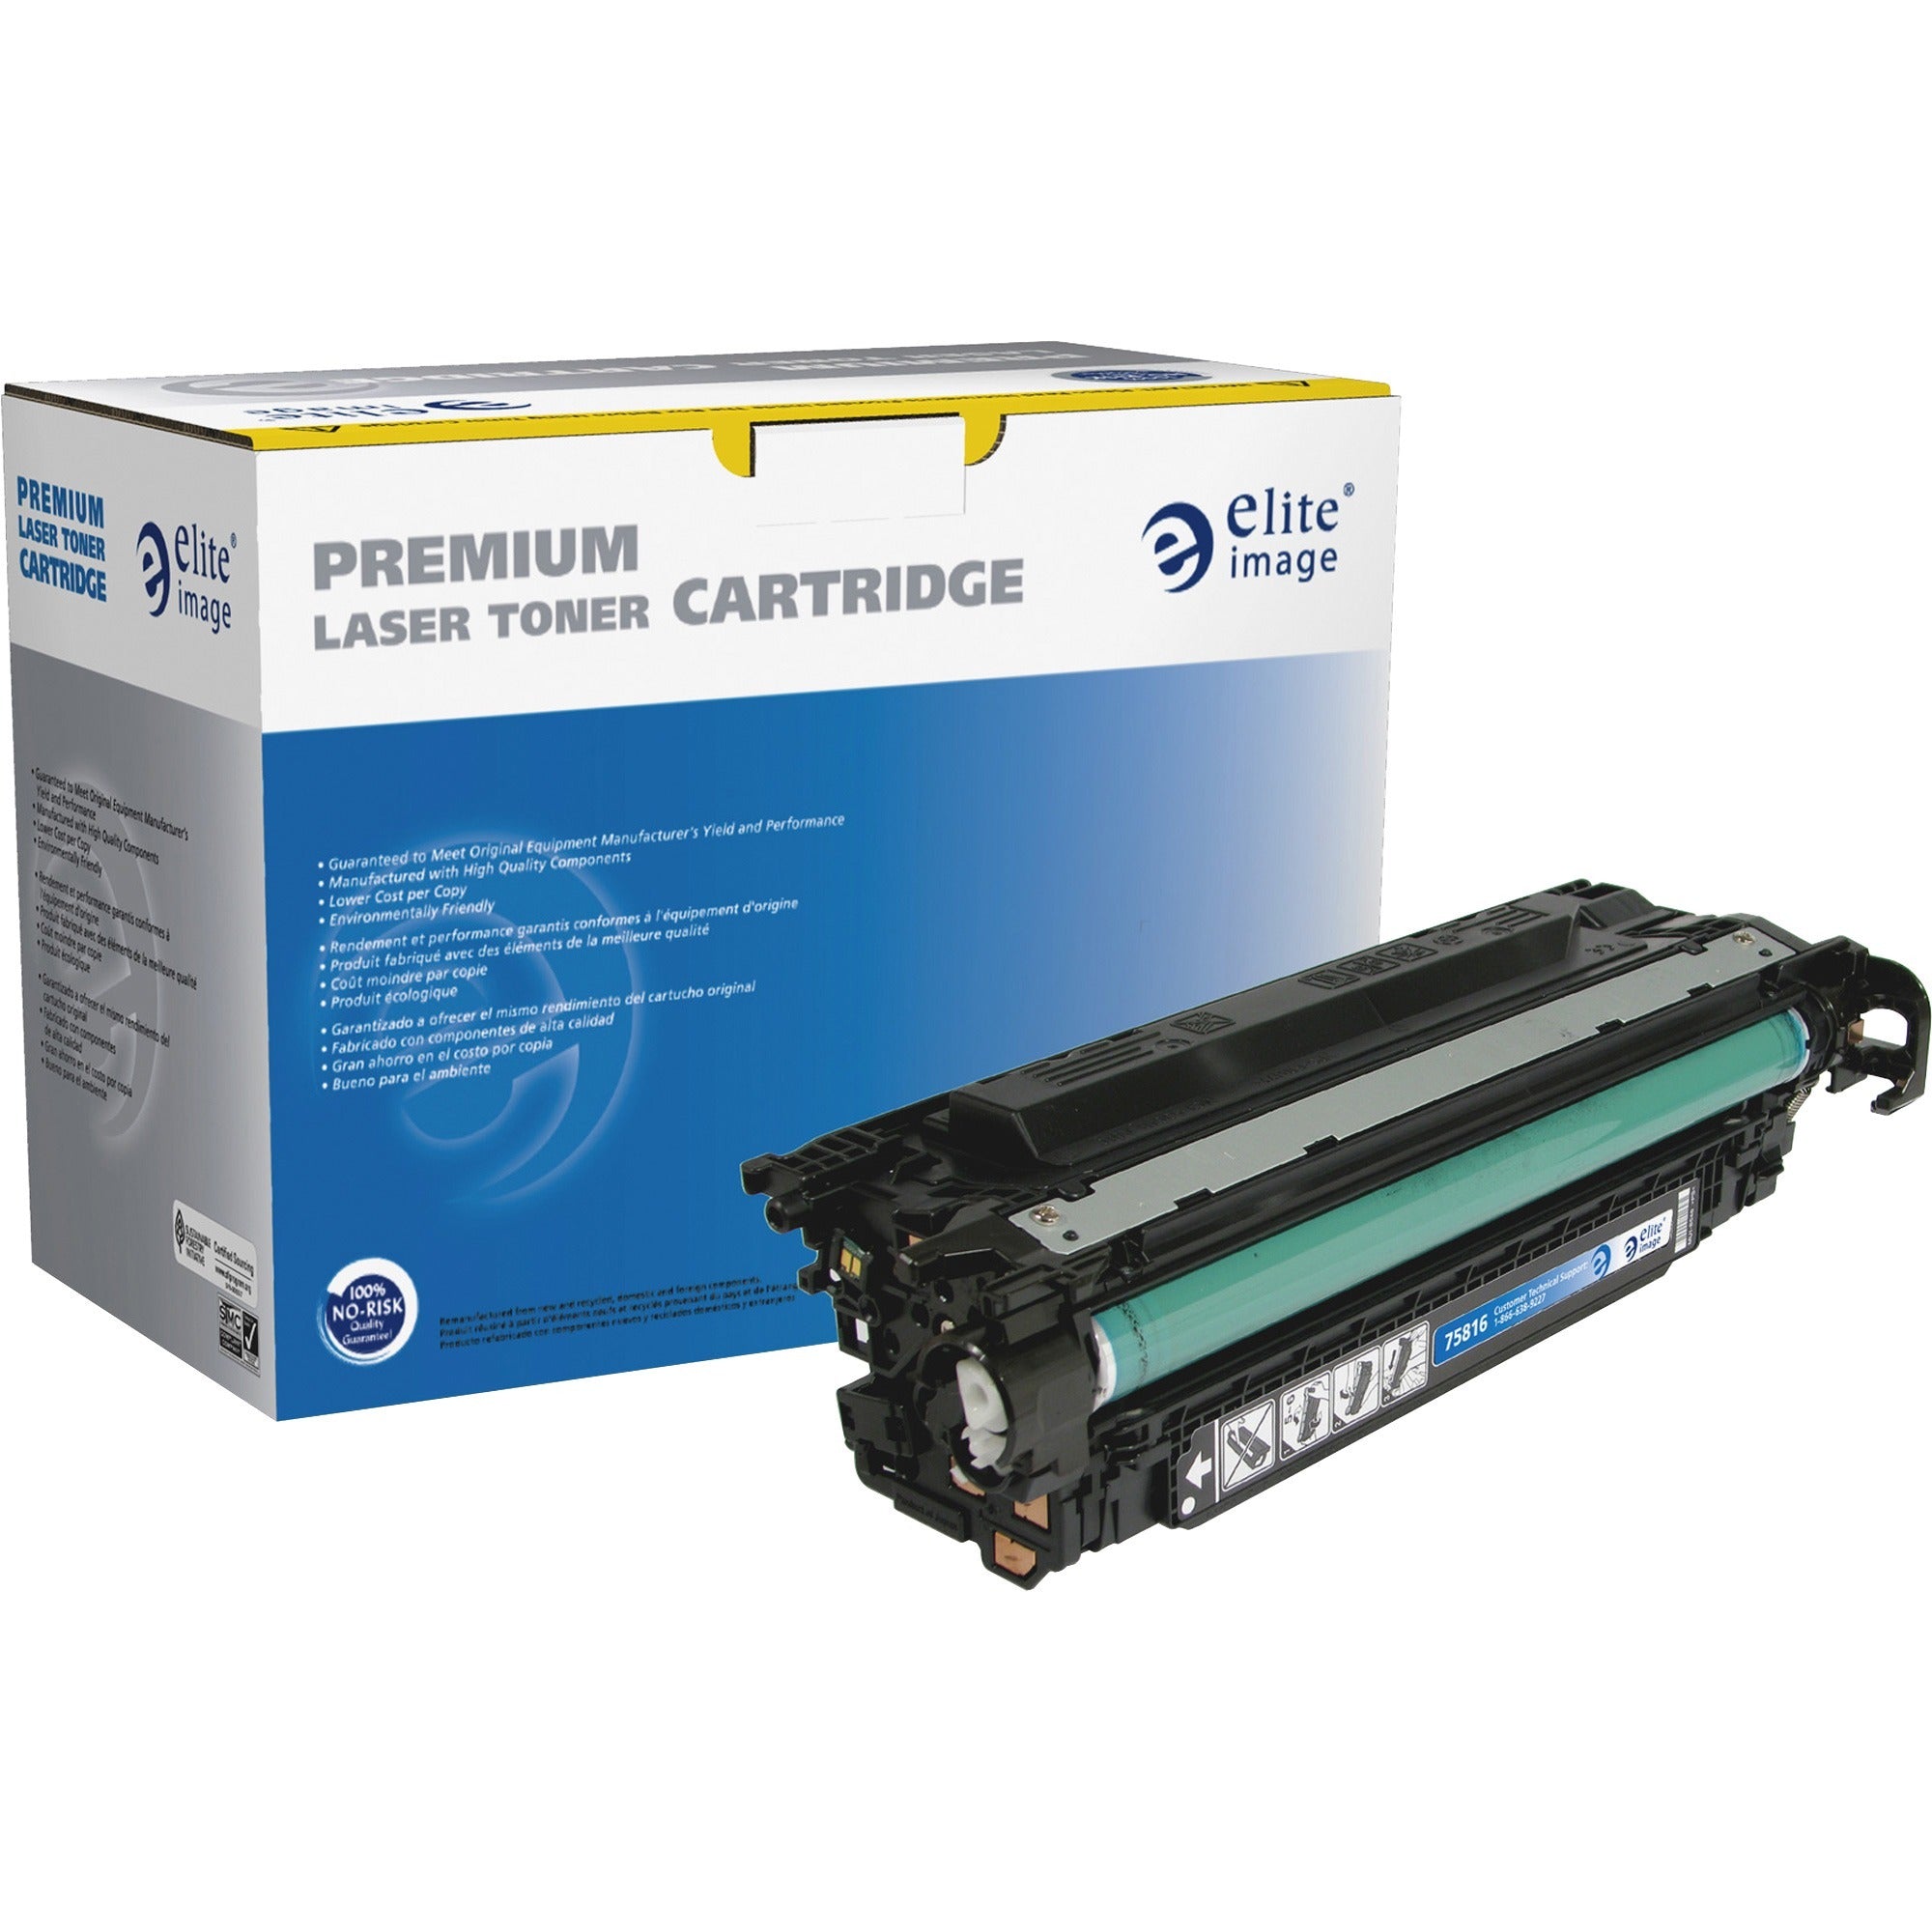 Elite Image Remanufactured High Yield Laser Toner Cartridge - Alternative for HP 507X (CE400X) - Black - 1 Each - 11000 Pages - 1